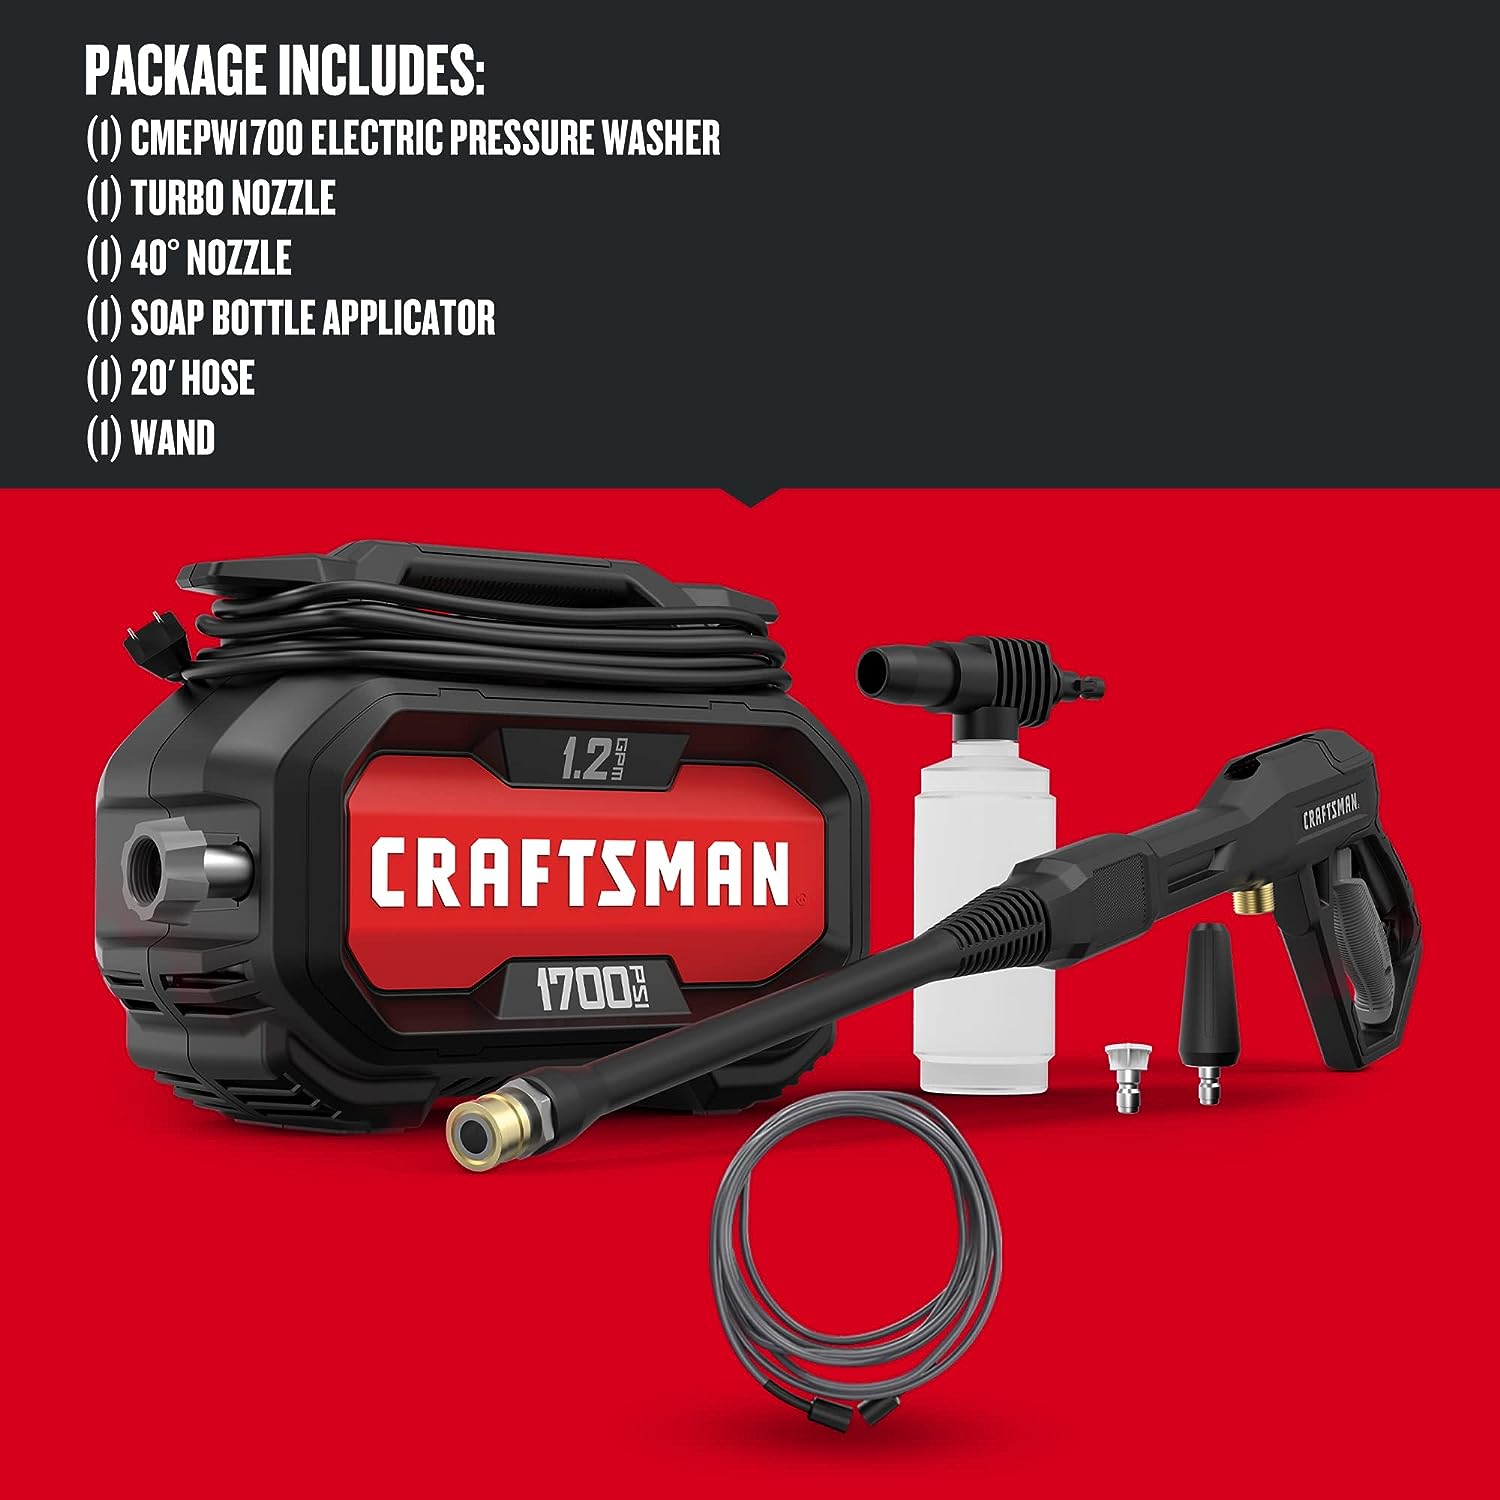 https://bigbigmart.com/wp-content/uploads/2023/08/CRAFTSMAN-Electric-Pressure-Washer-Cold-Water-1700-PSI-1.2-GPM-Corded-CMEPW17000.jpg